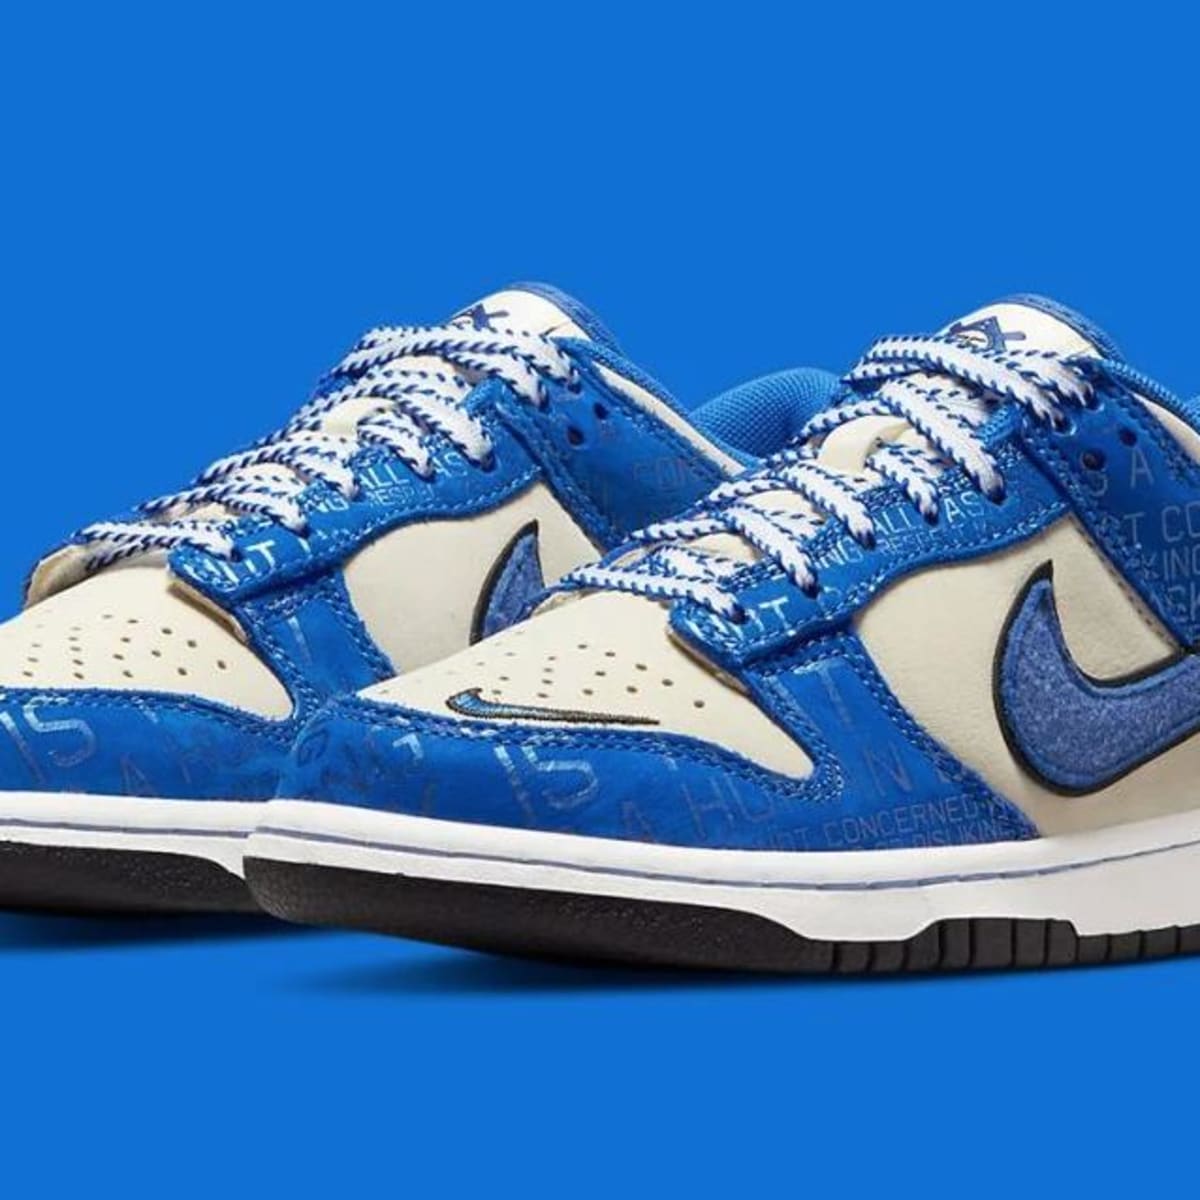 Dodgers News: Jackie Robinson Inspired Nike Dunk Lows Set to